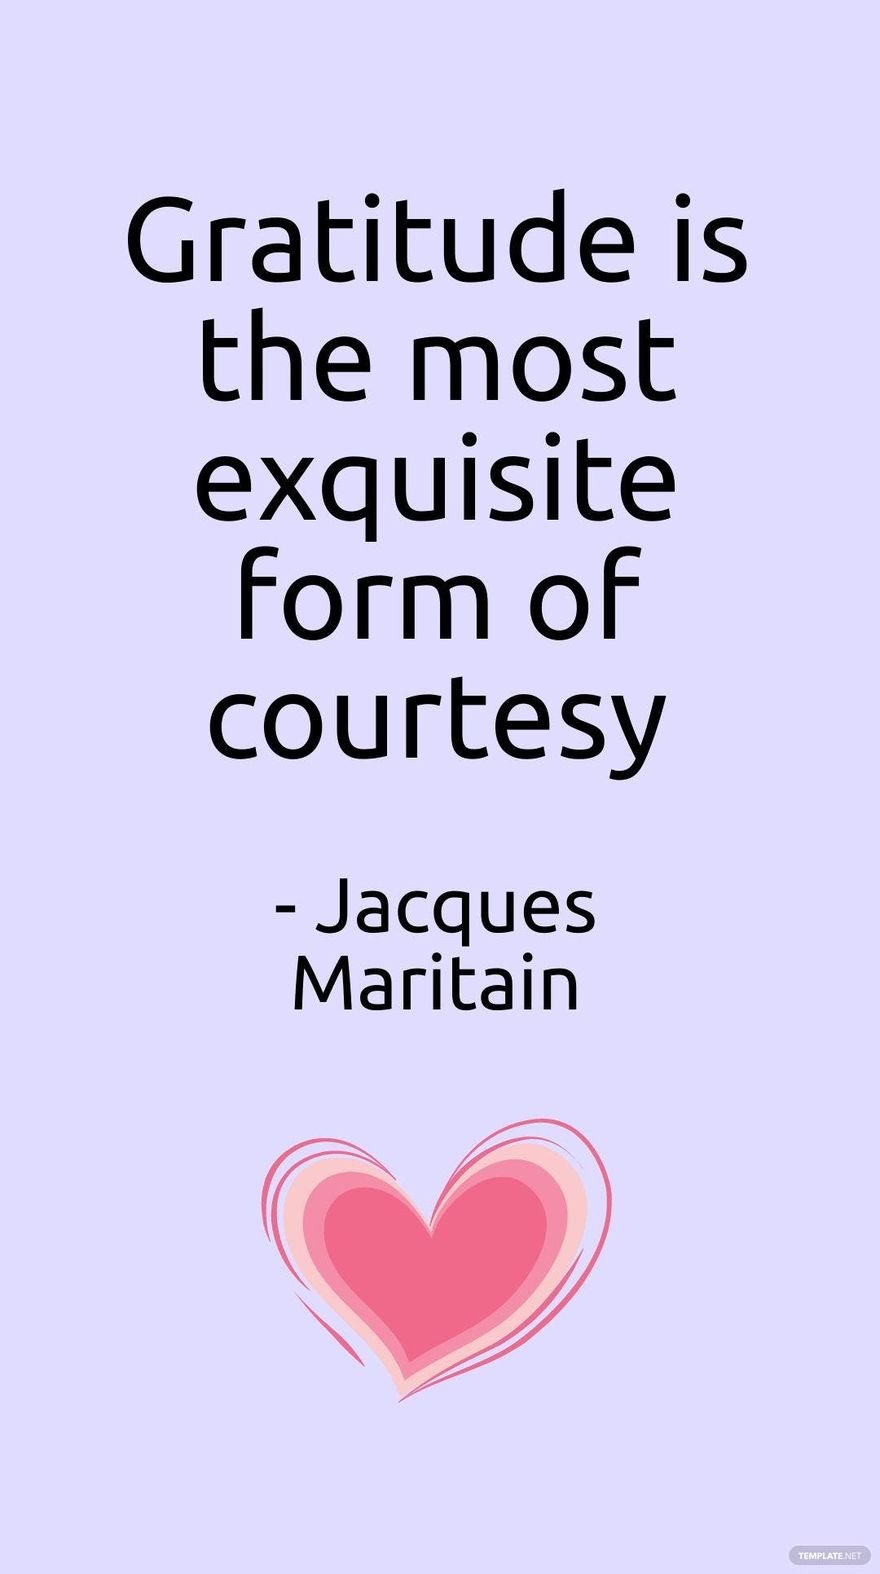 Jacques Maritain - Gratitude is the most exquisite form of courtesy in JPG